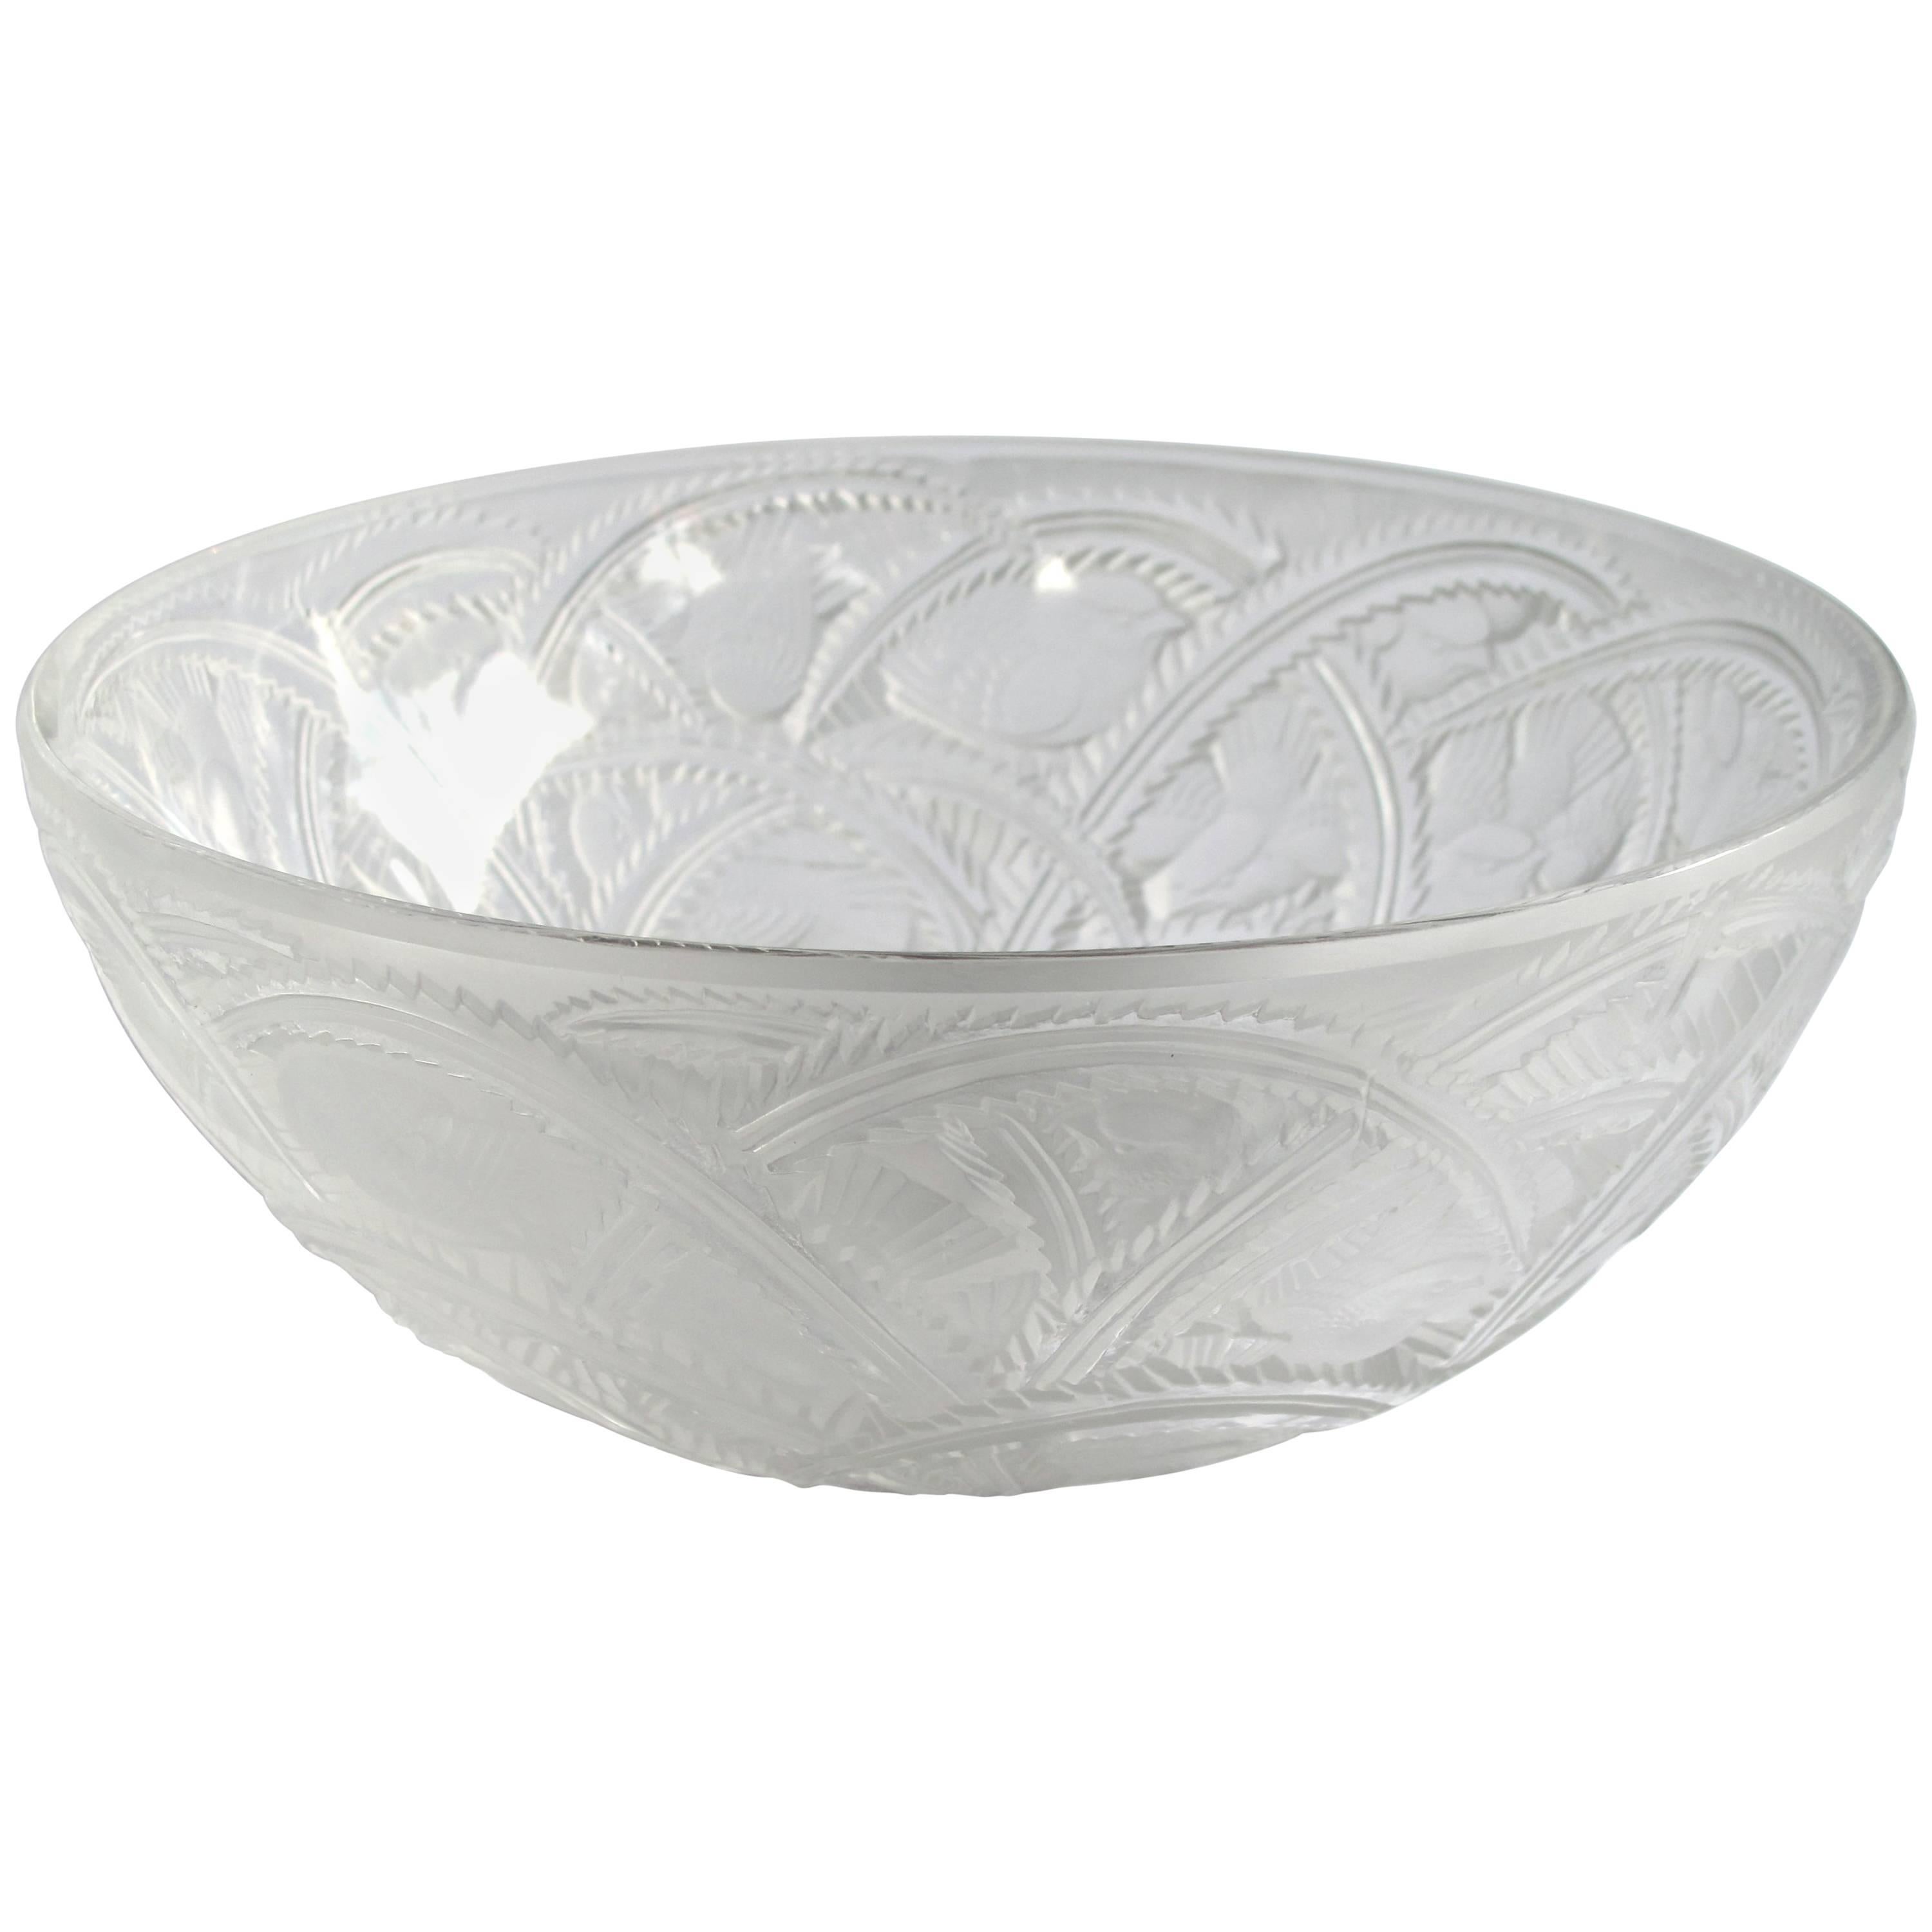 Exquisite Vintage French Clear and Frosted Glass Pinsons Bowl, Rene Lalique